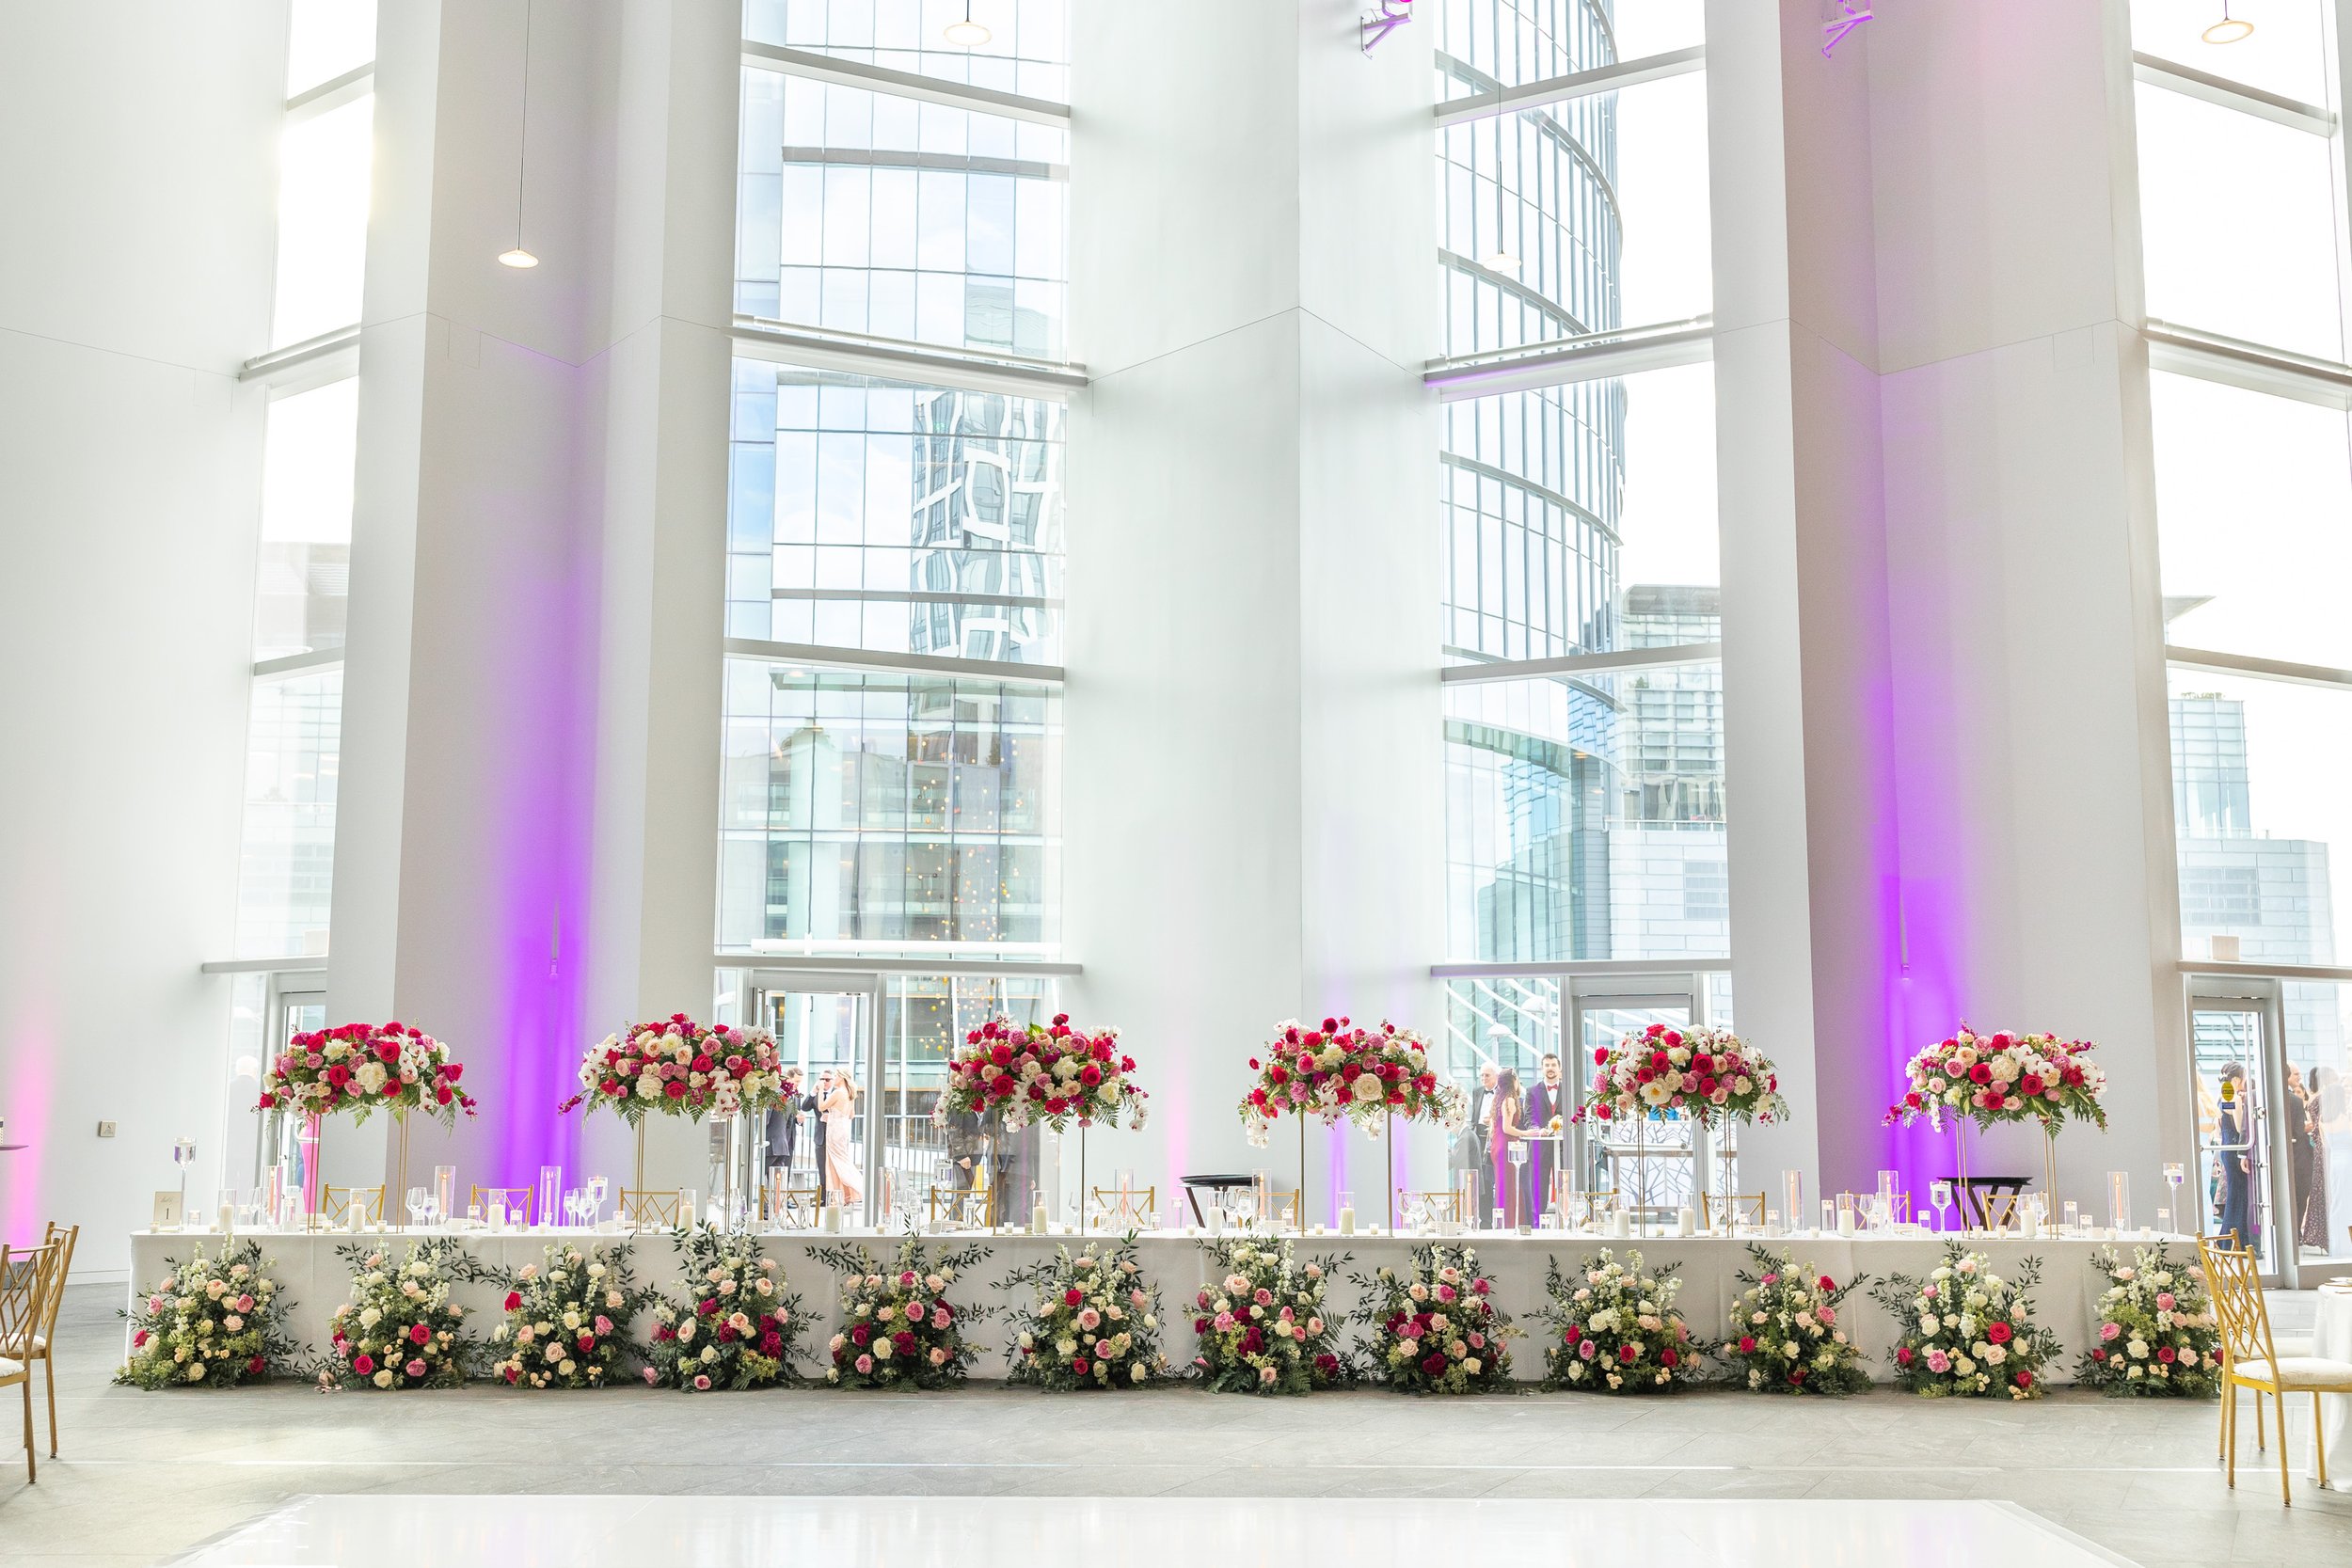 Head table for bridesmaids and groomsmen to join bride and groom during wedding reception